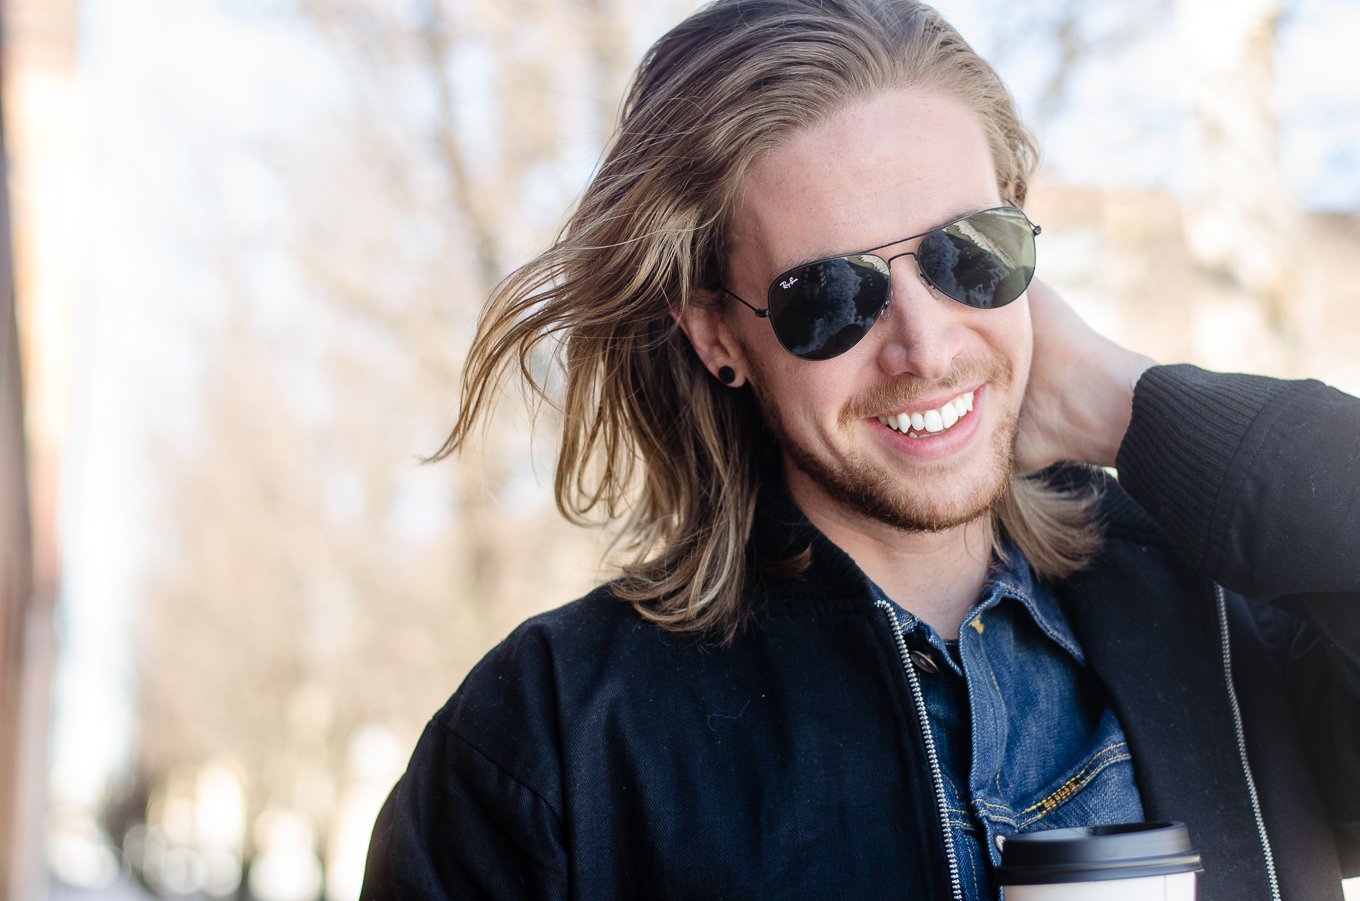 The Kentucky Gent, a men's fashion and lifestyle blogger, whips his hair back and forth. 